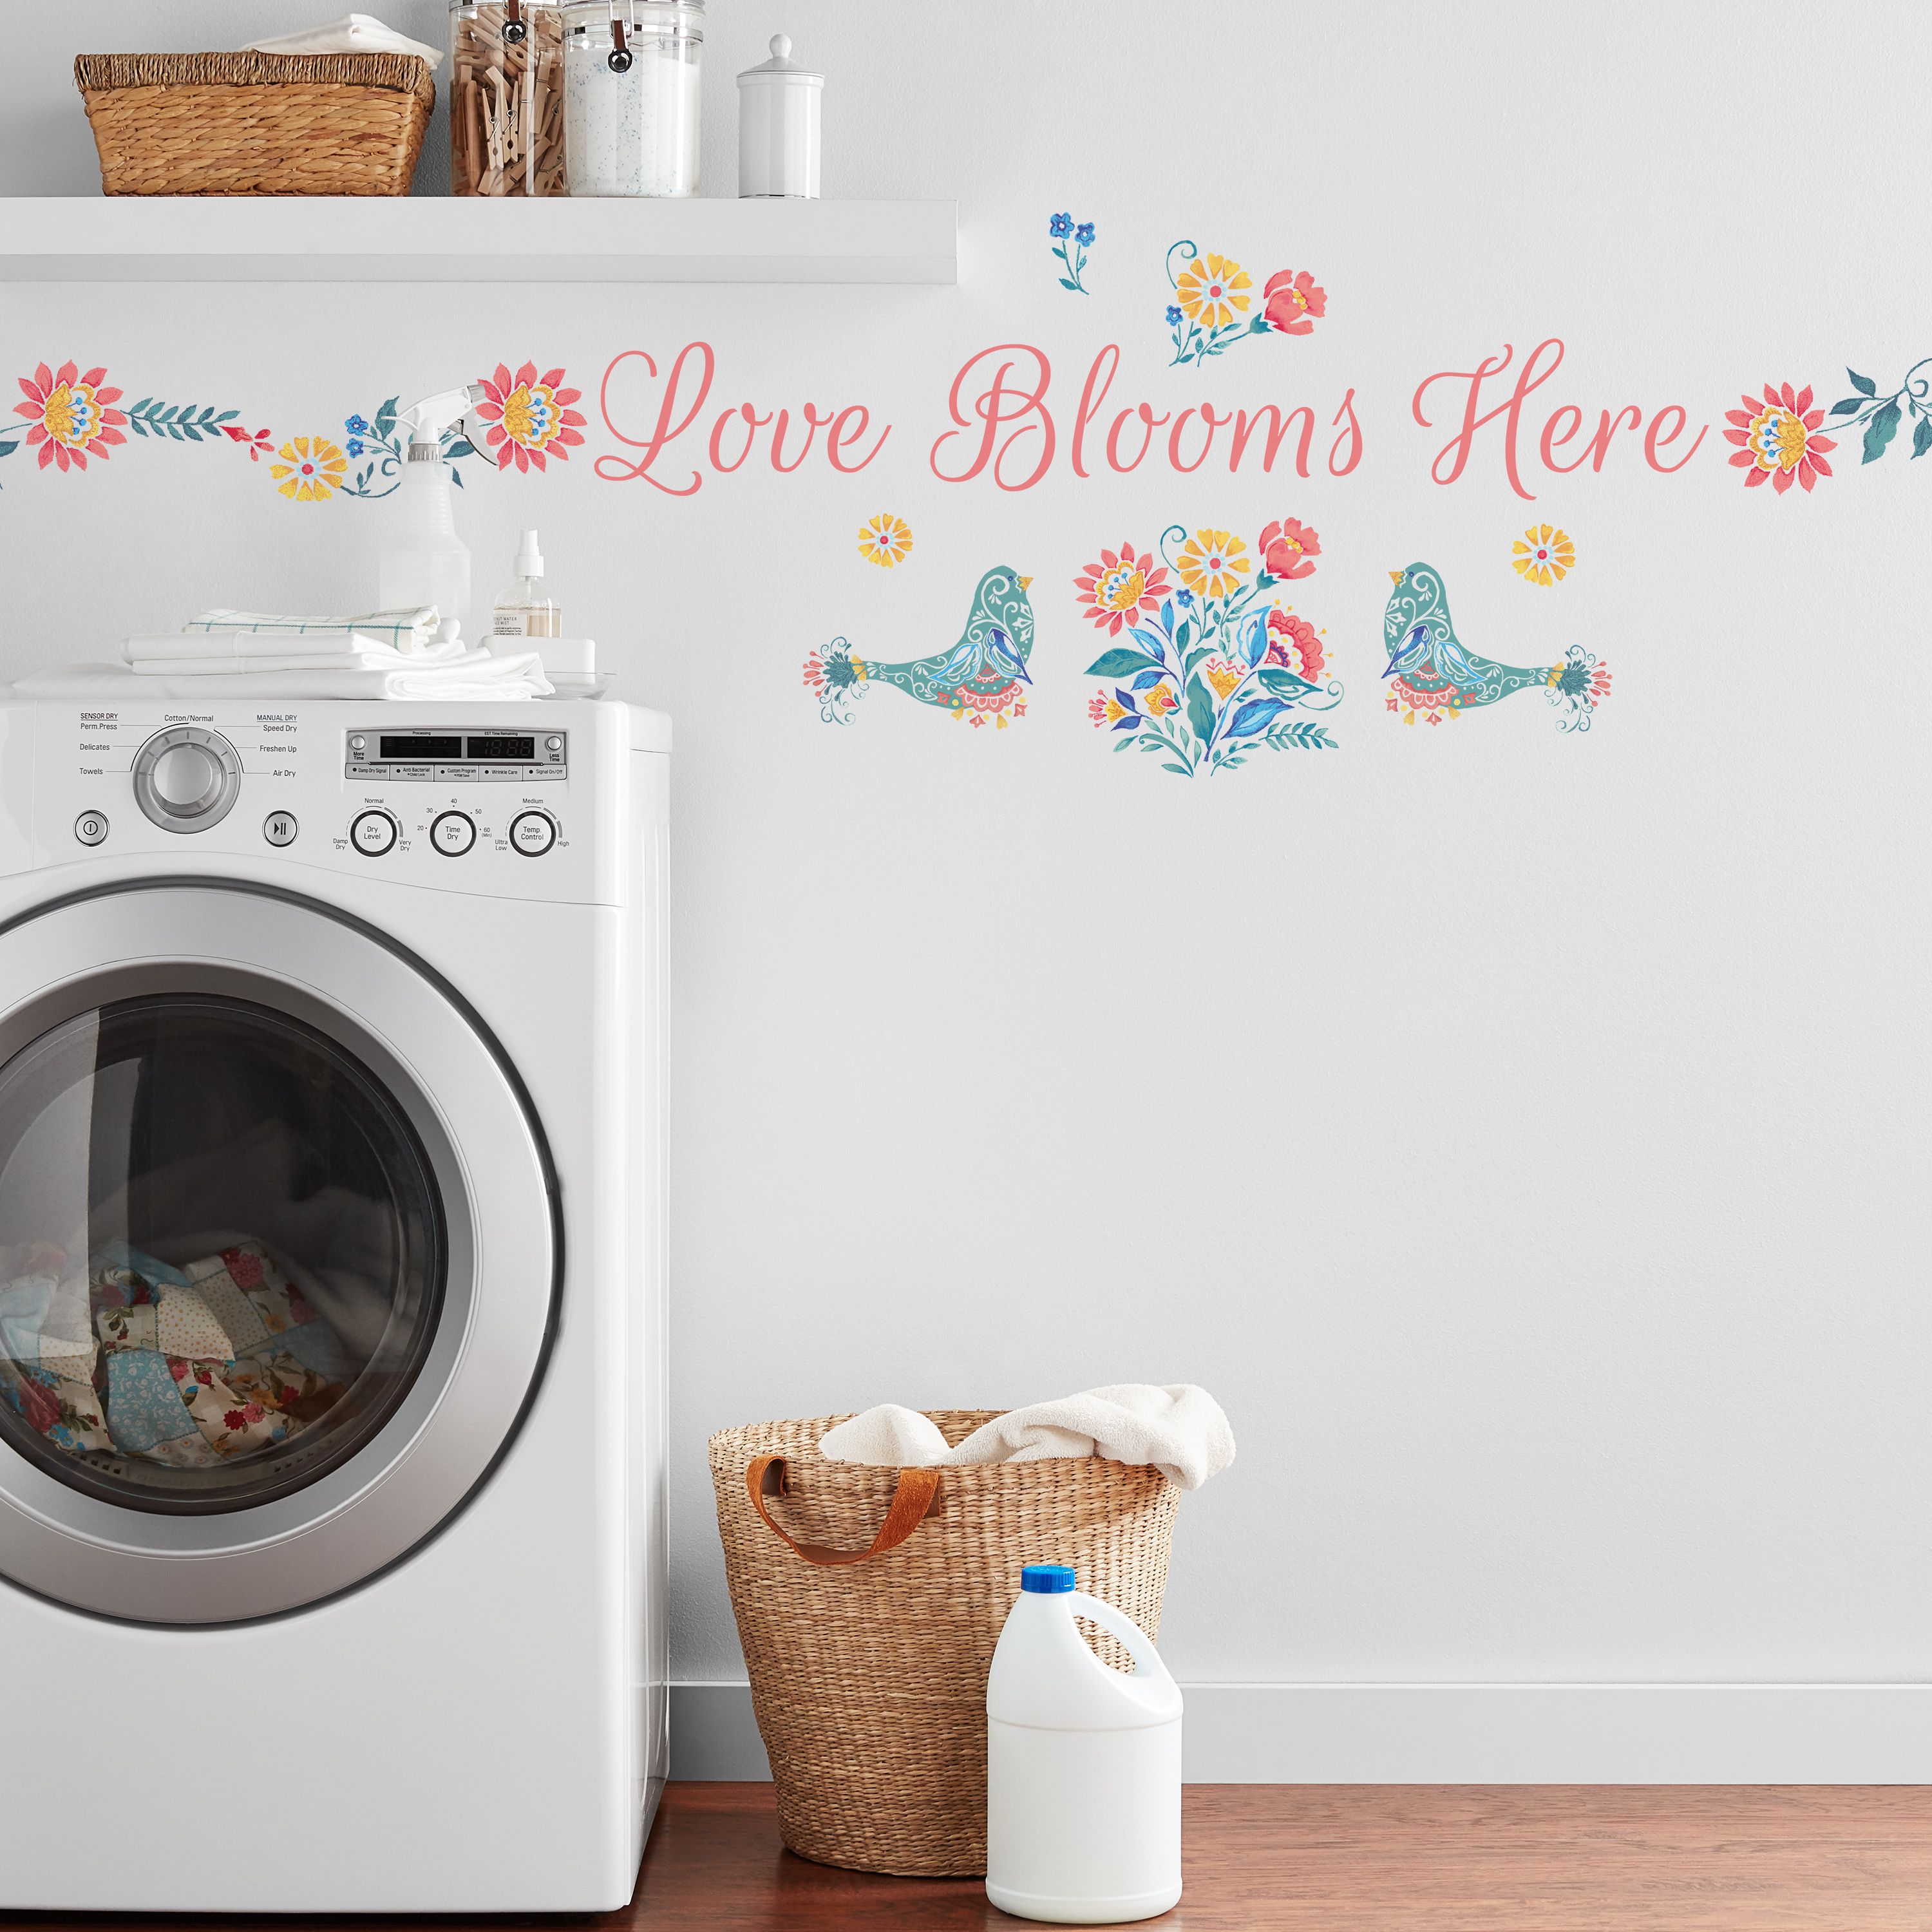 The Pioneer Woman Love Blooms Here Peel and Stick Wall Decals